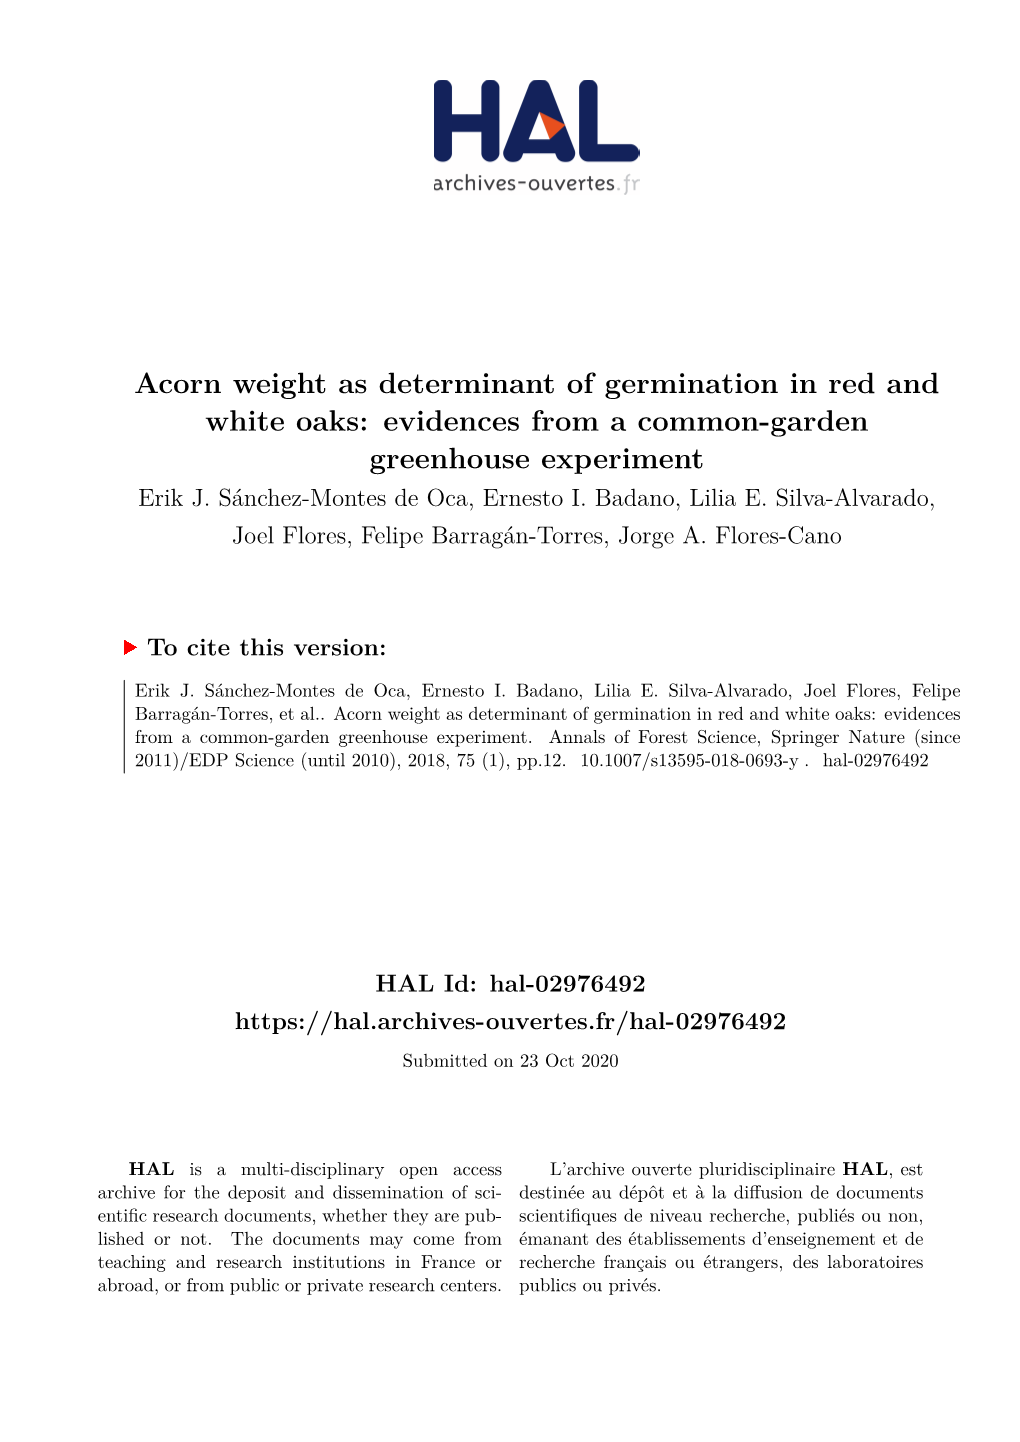 Acorn Weight As Determinant of Germination in Red and White Oaks: Evidences from a Common-Garden Greenhouse Experiment Erik J